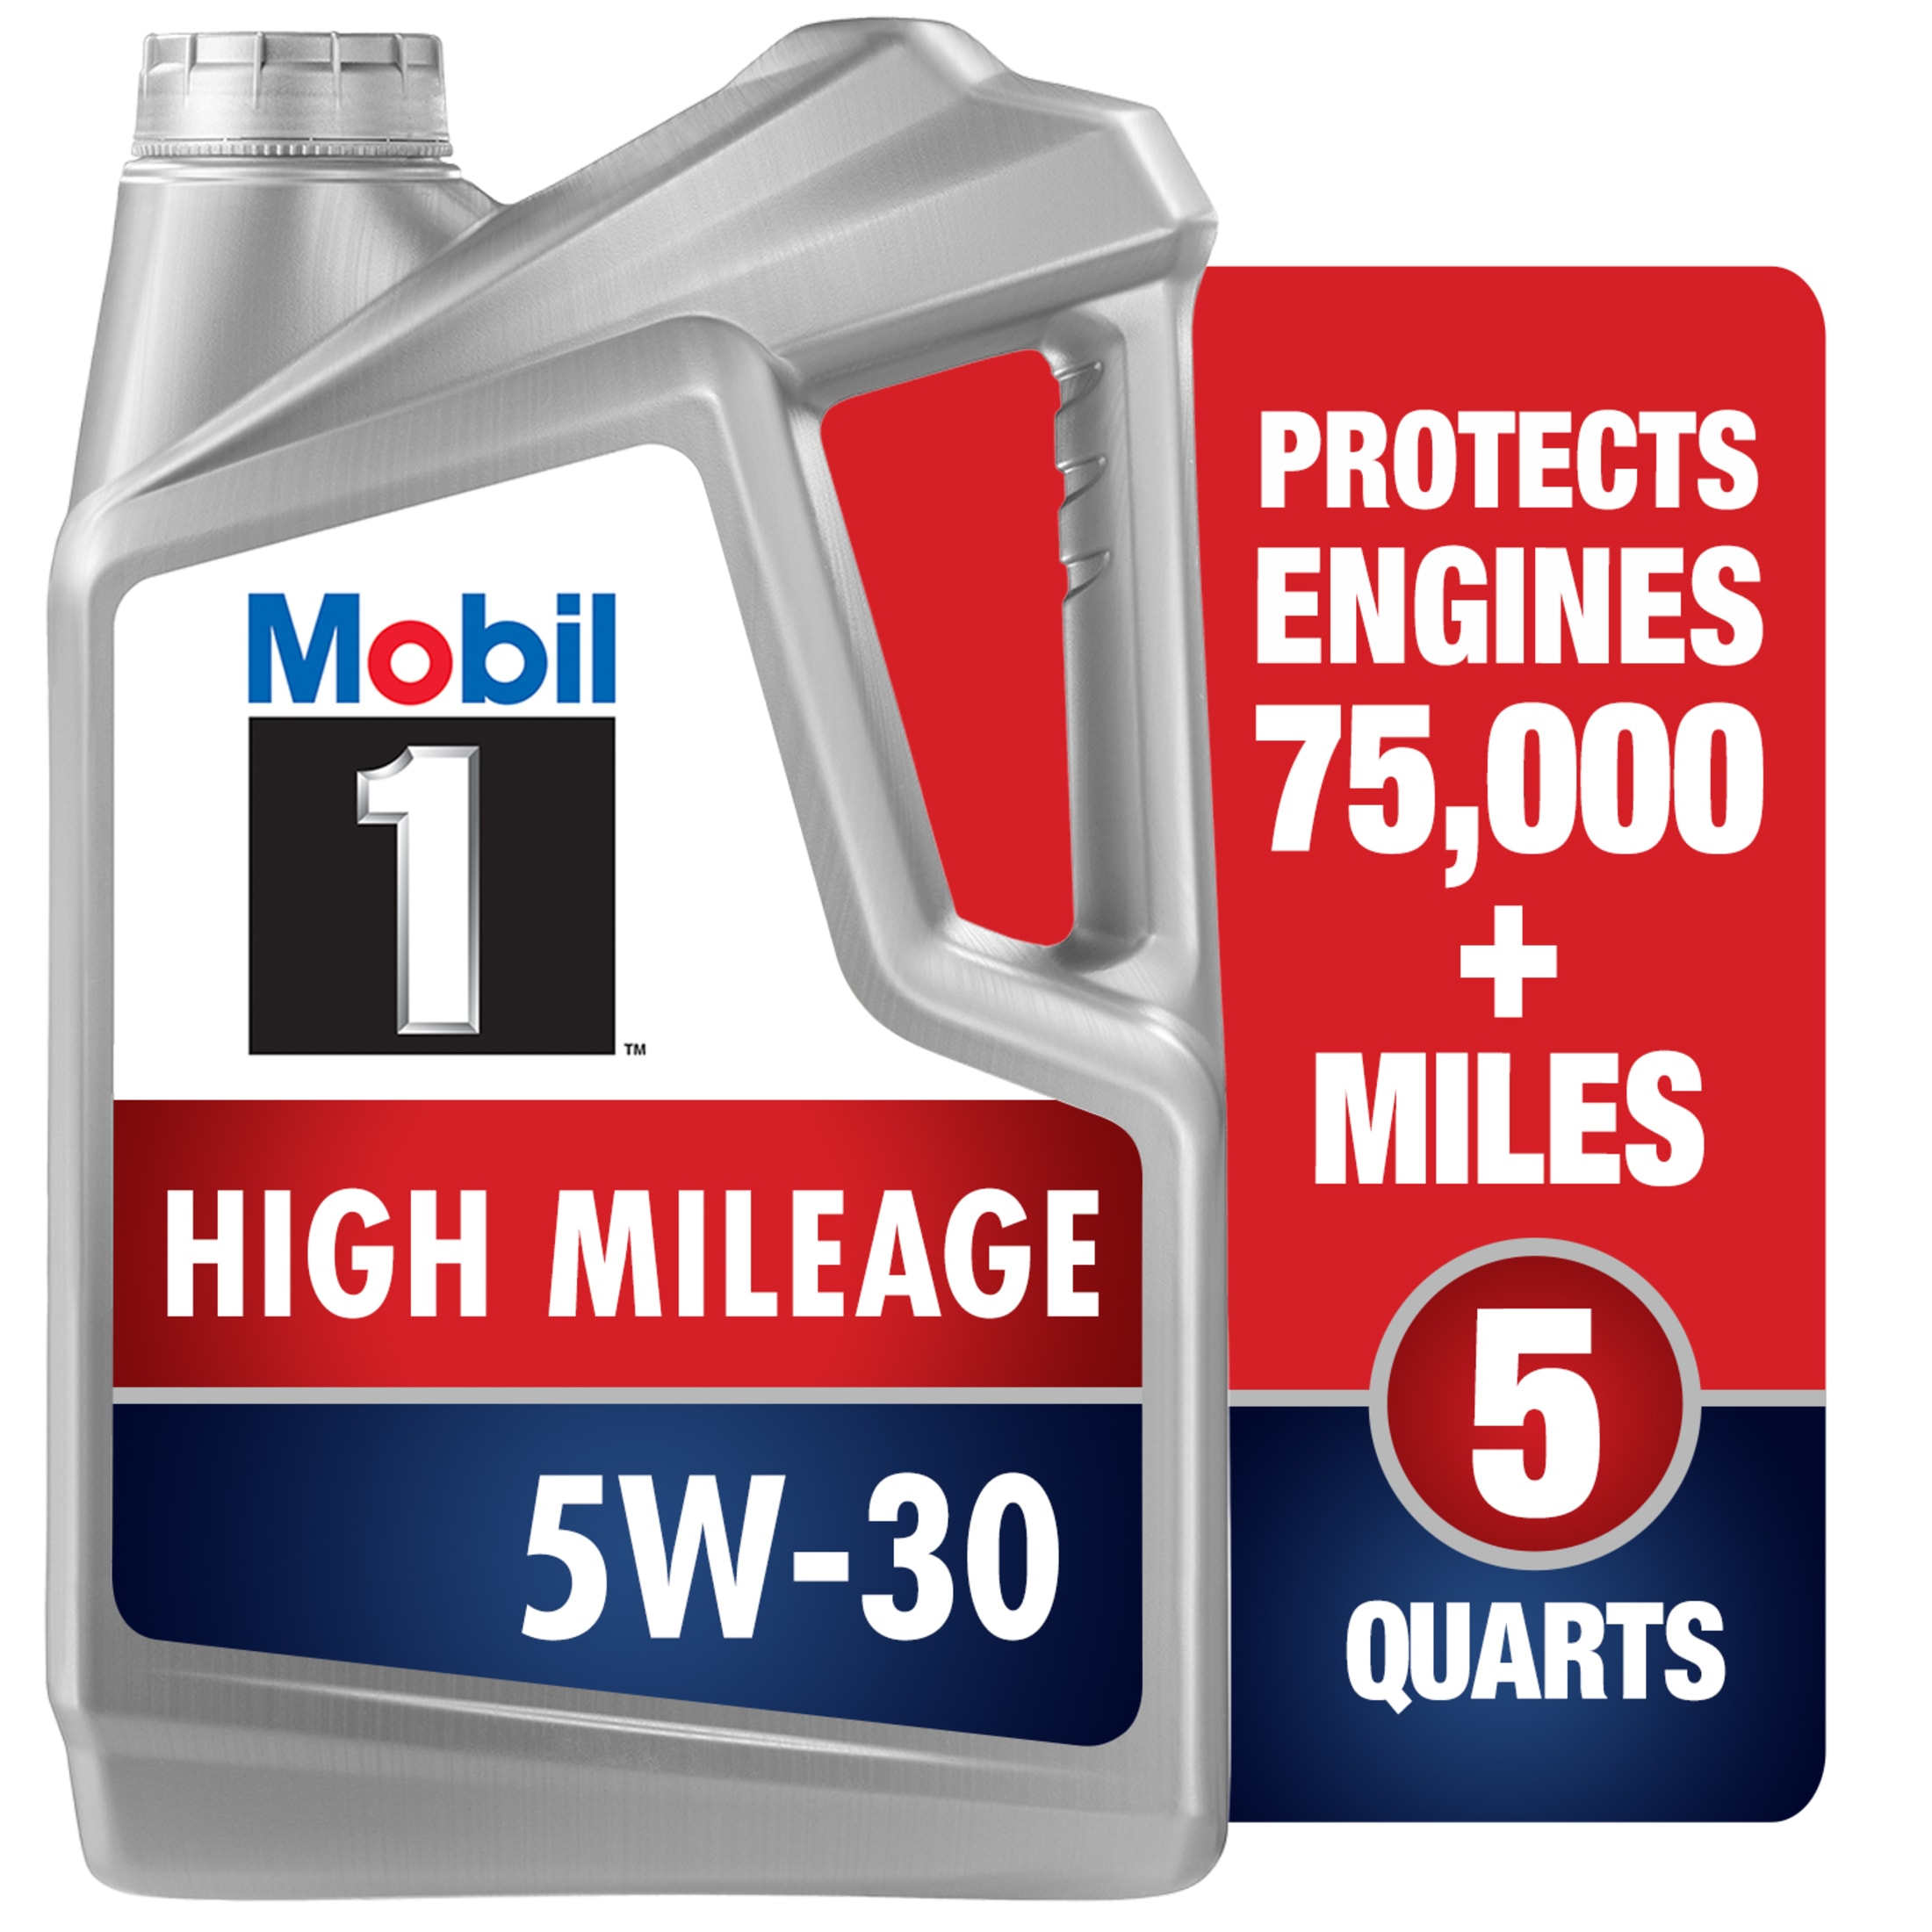 Mobil 1 High Mileage Full Synthetic Motor Oil 5W-30, 5 Quart - image 3 of 9